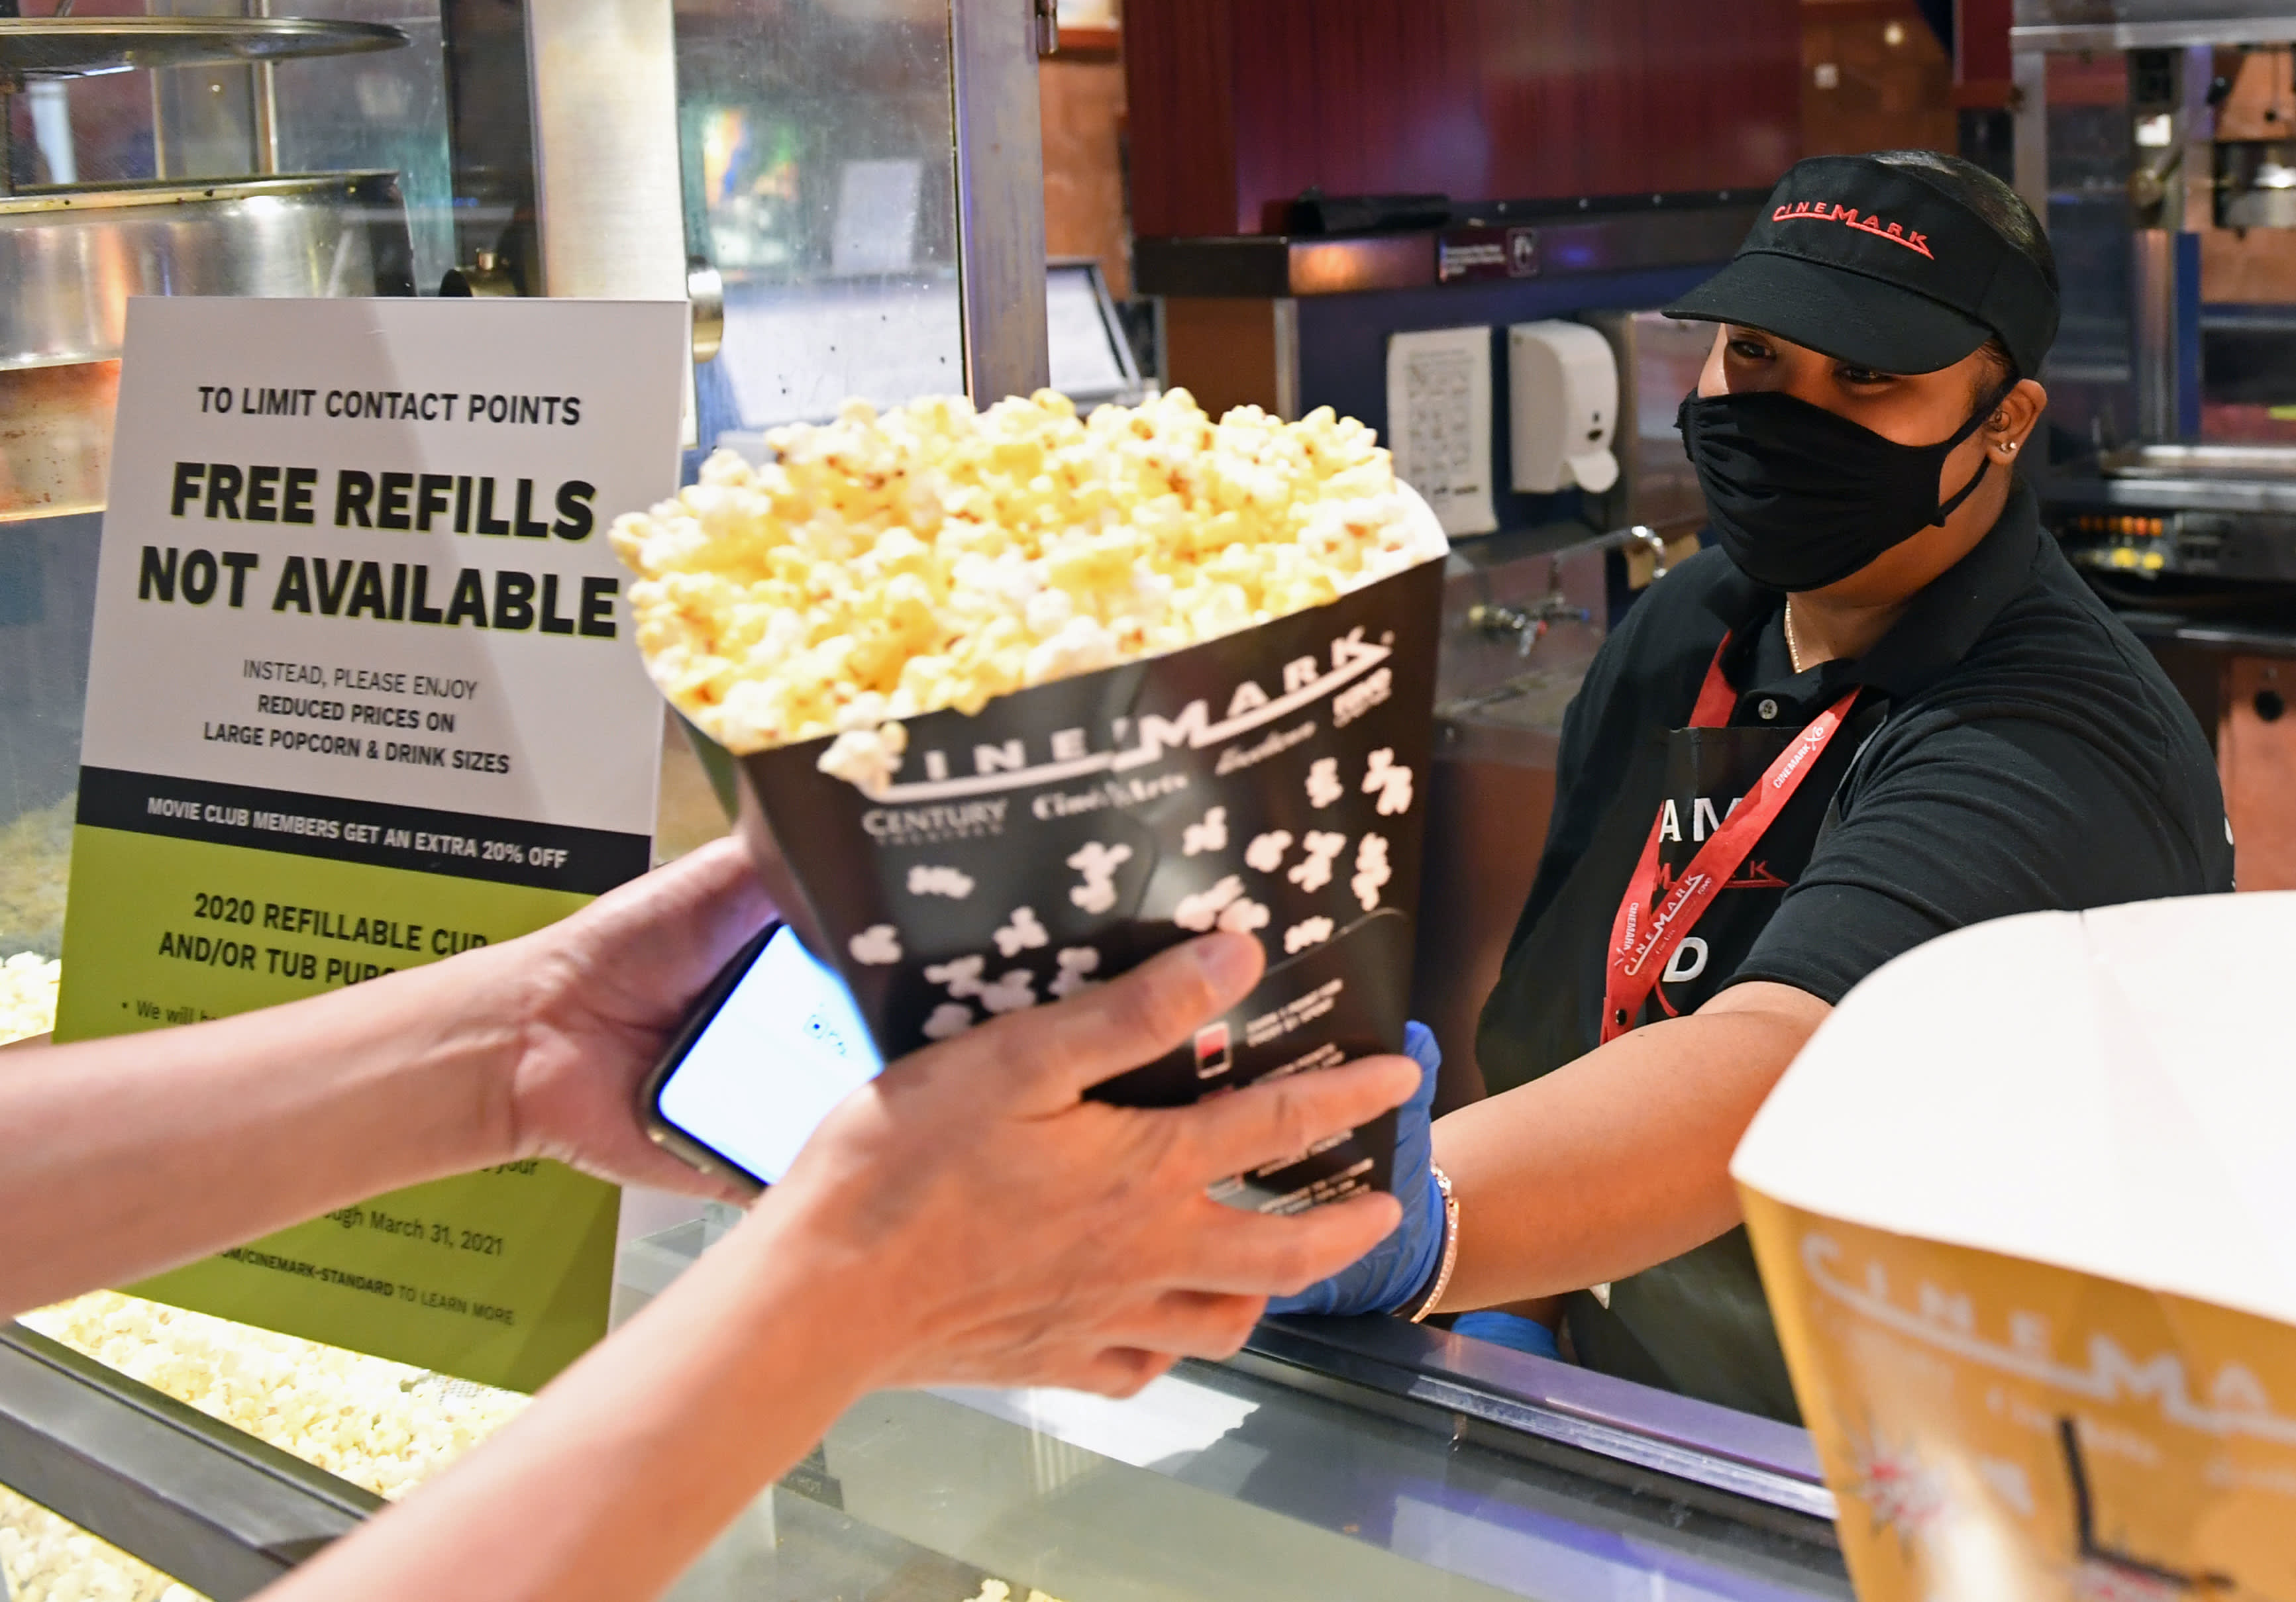 Why Do Movie Theaters Serve Popcorn?